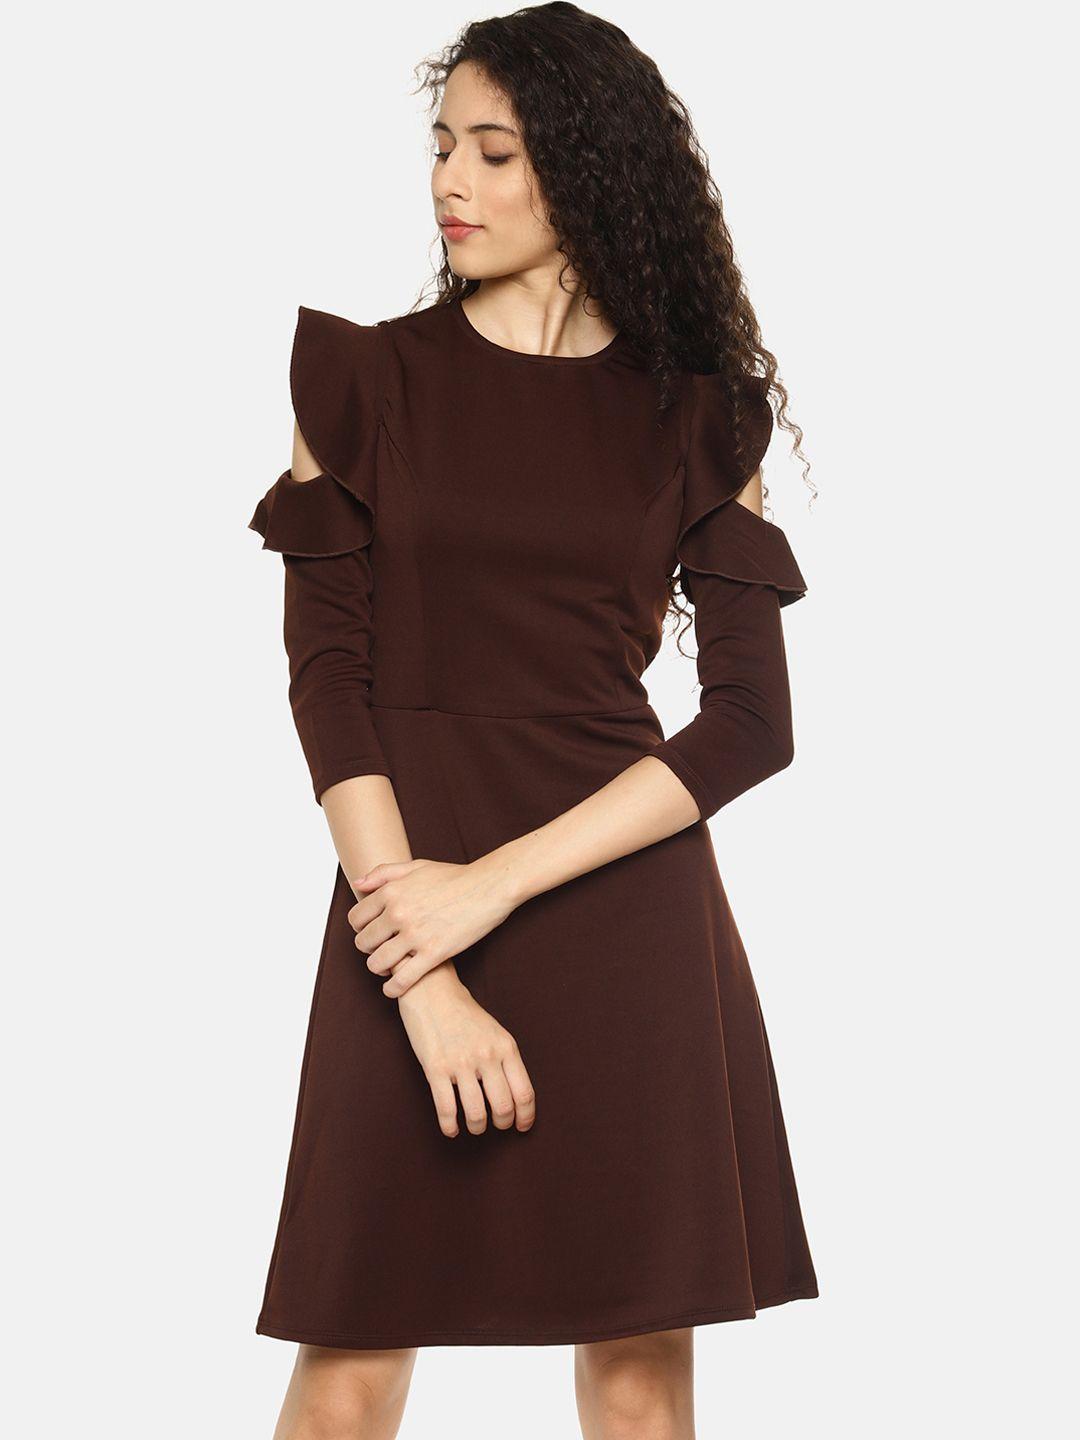 aara-women-coffee-brown-solid-fit-and-flare-dress